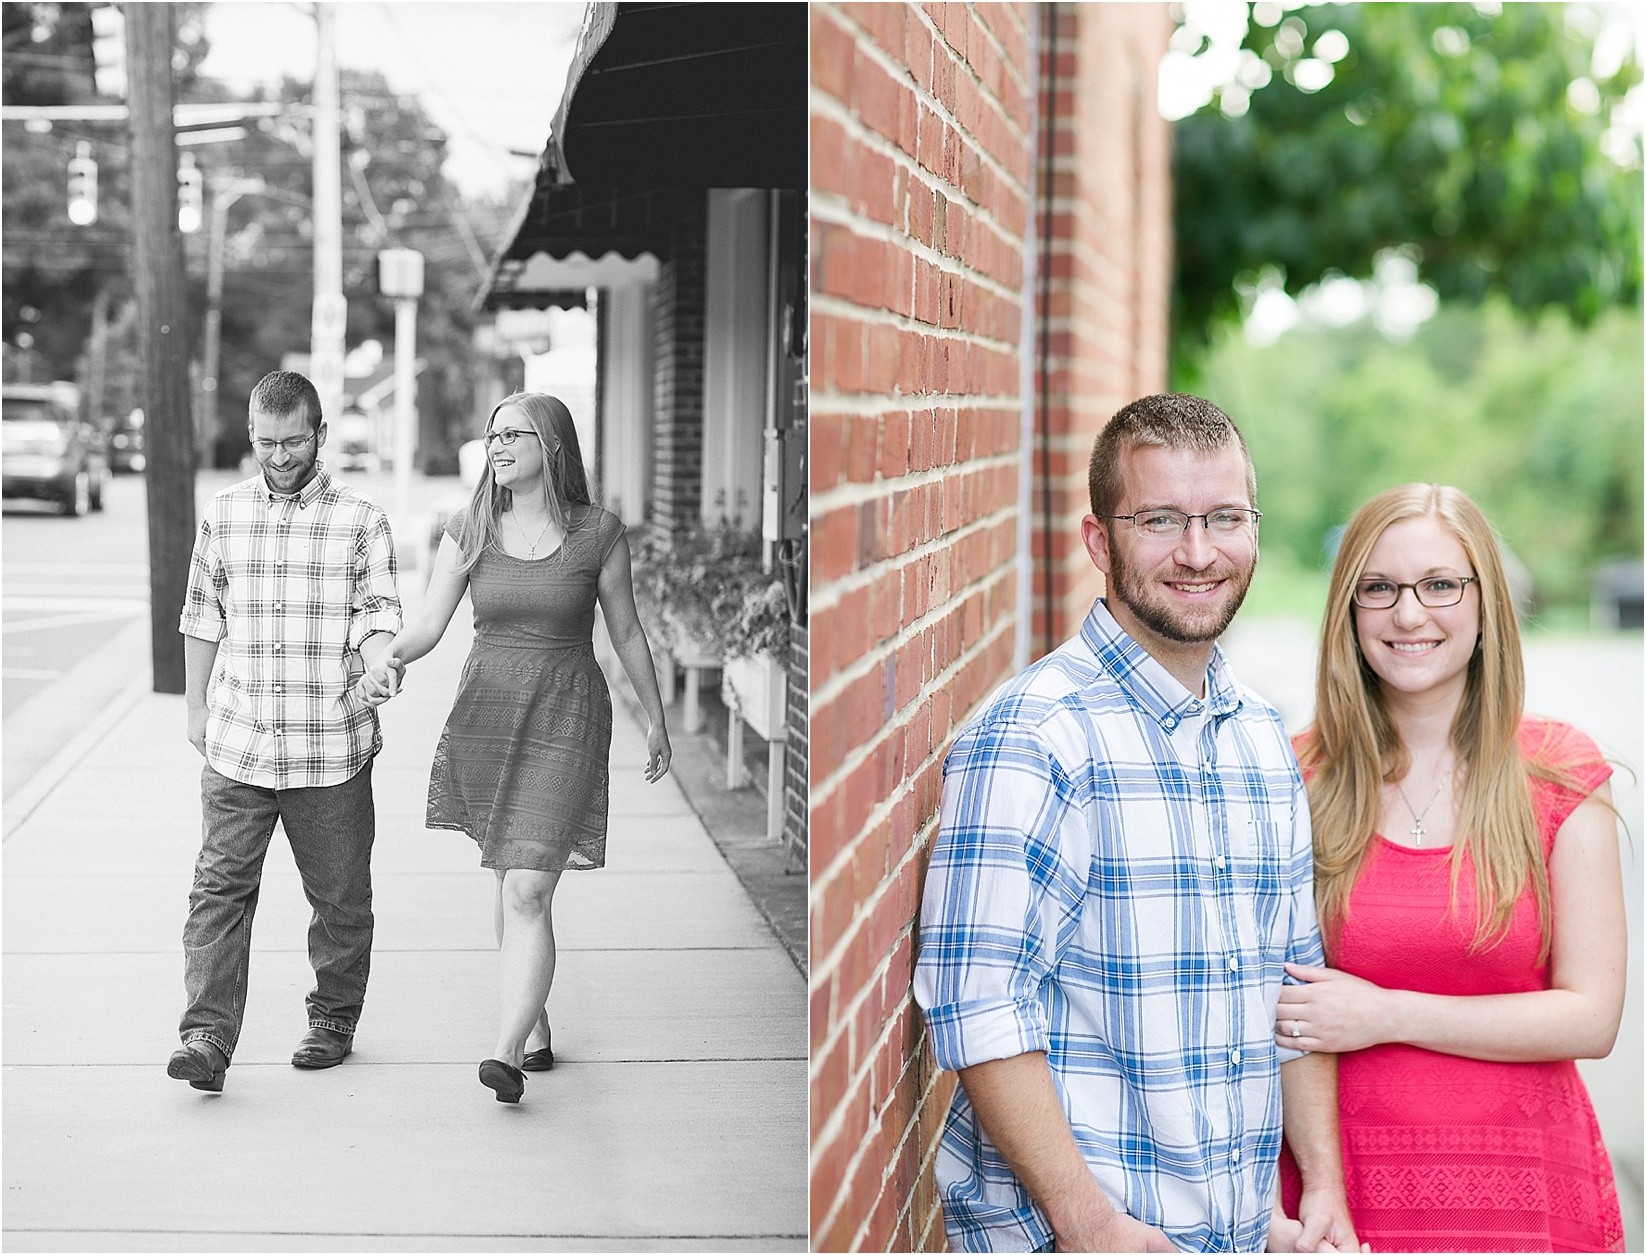 walking hand and hand during Andria & Matts Mount Pleasant engagement session in downtown mount pleasant nc